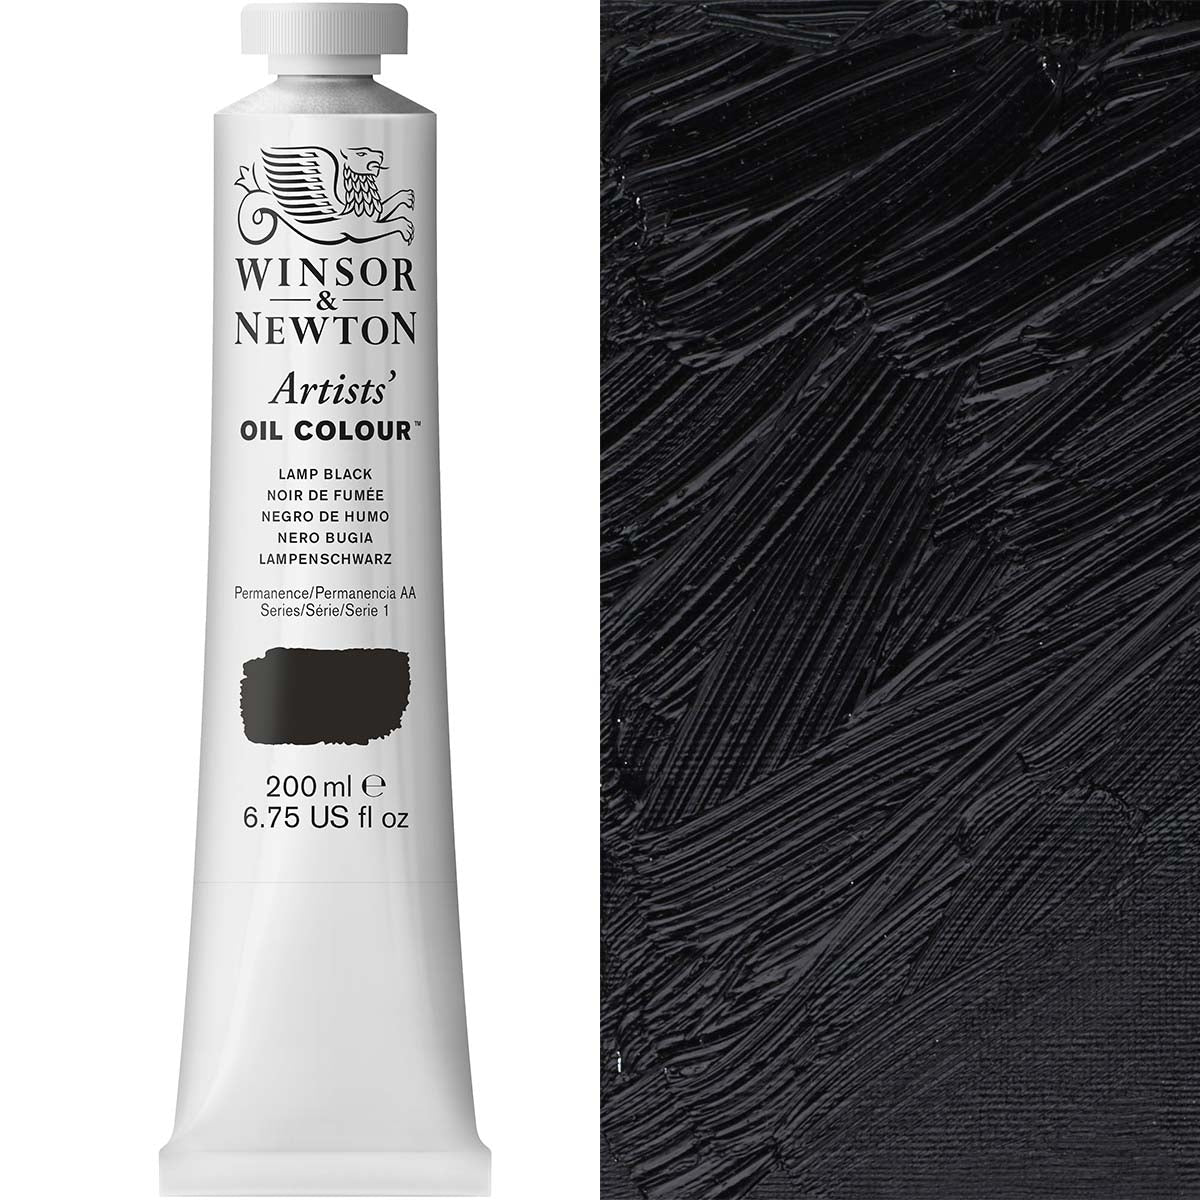 Winsor and Newton - Artists' Oil Colour - 200ml - Lamp Black